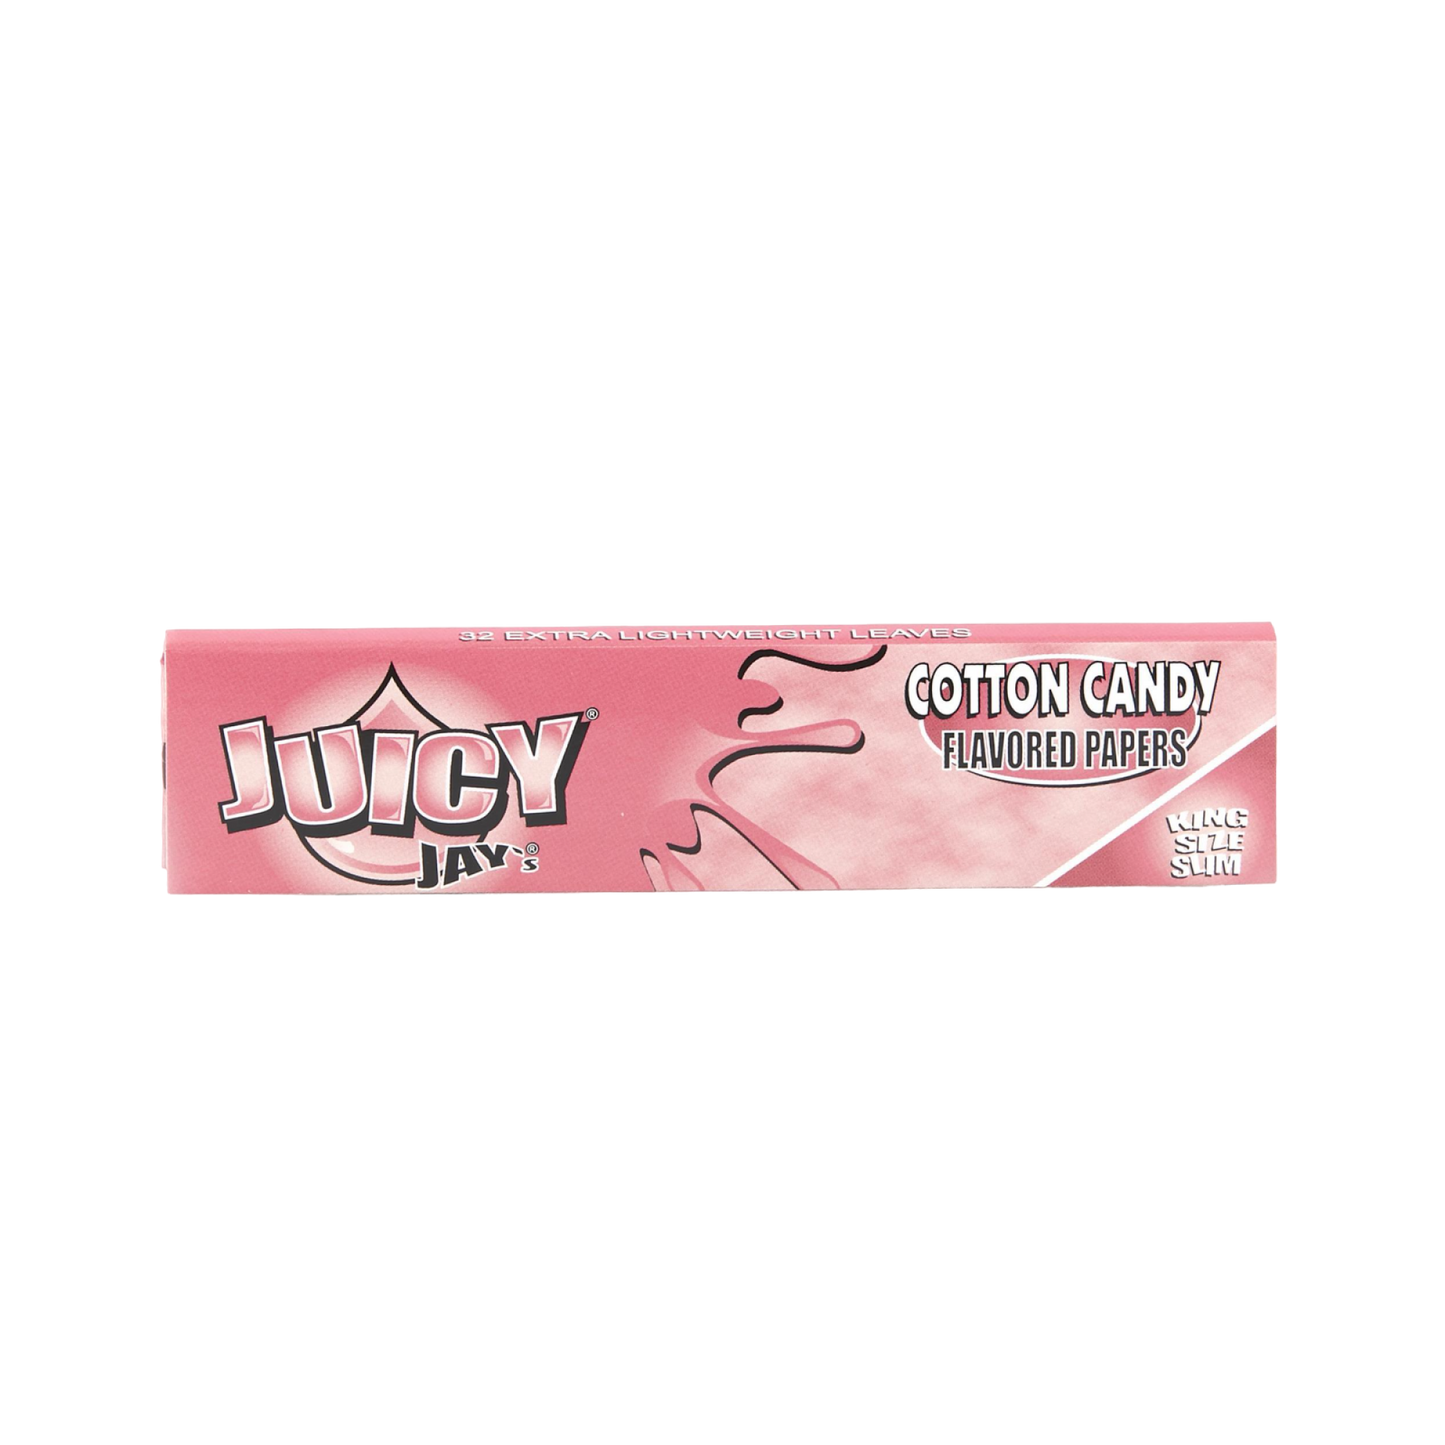 Juicy Jay’s Rolling Papers – Cotton Candy – King Size